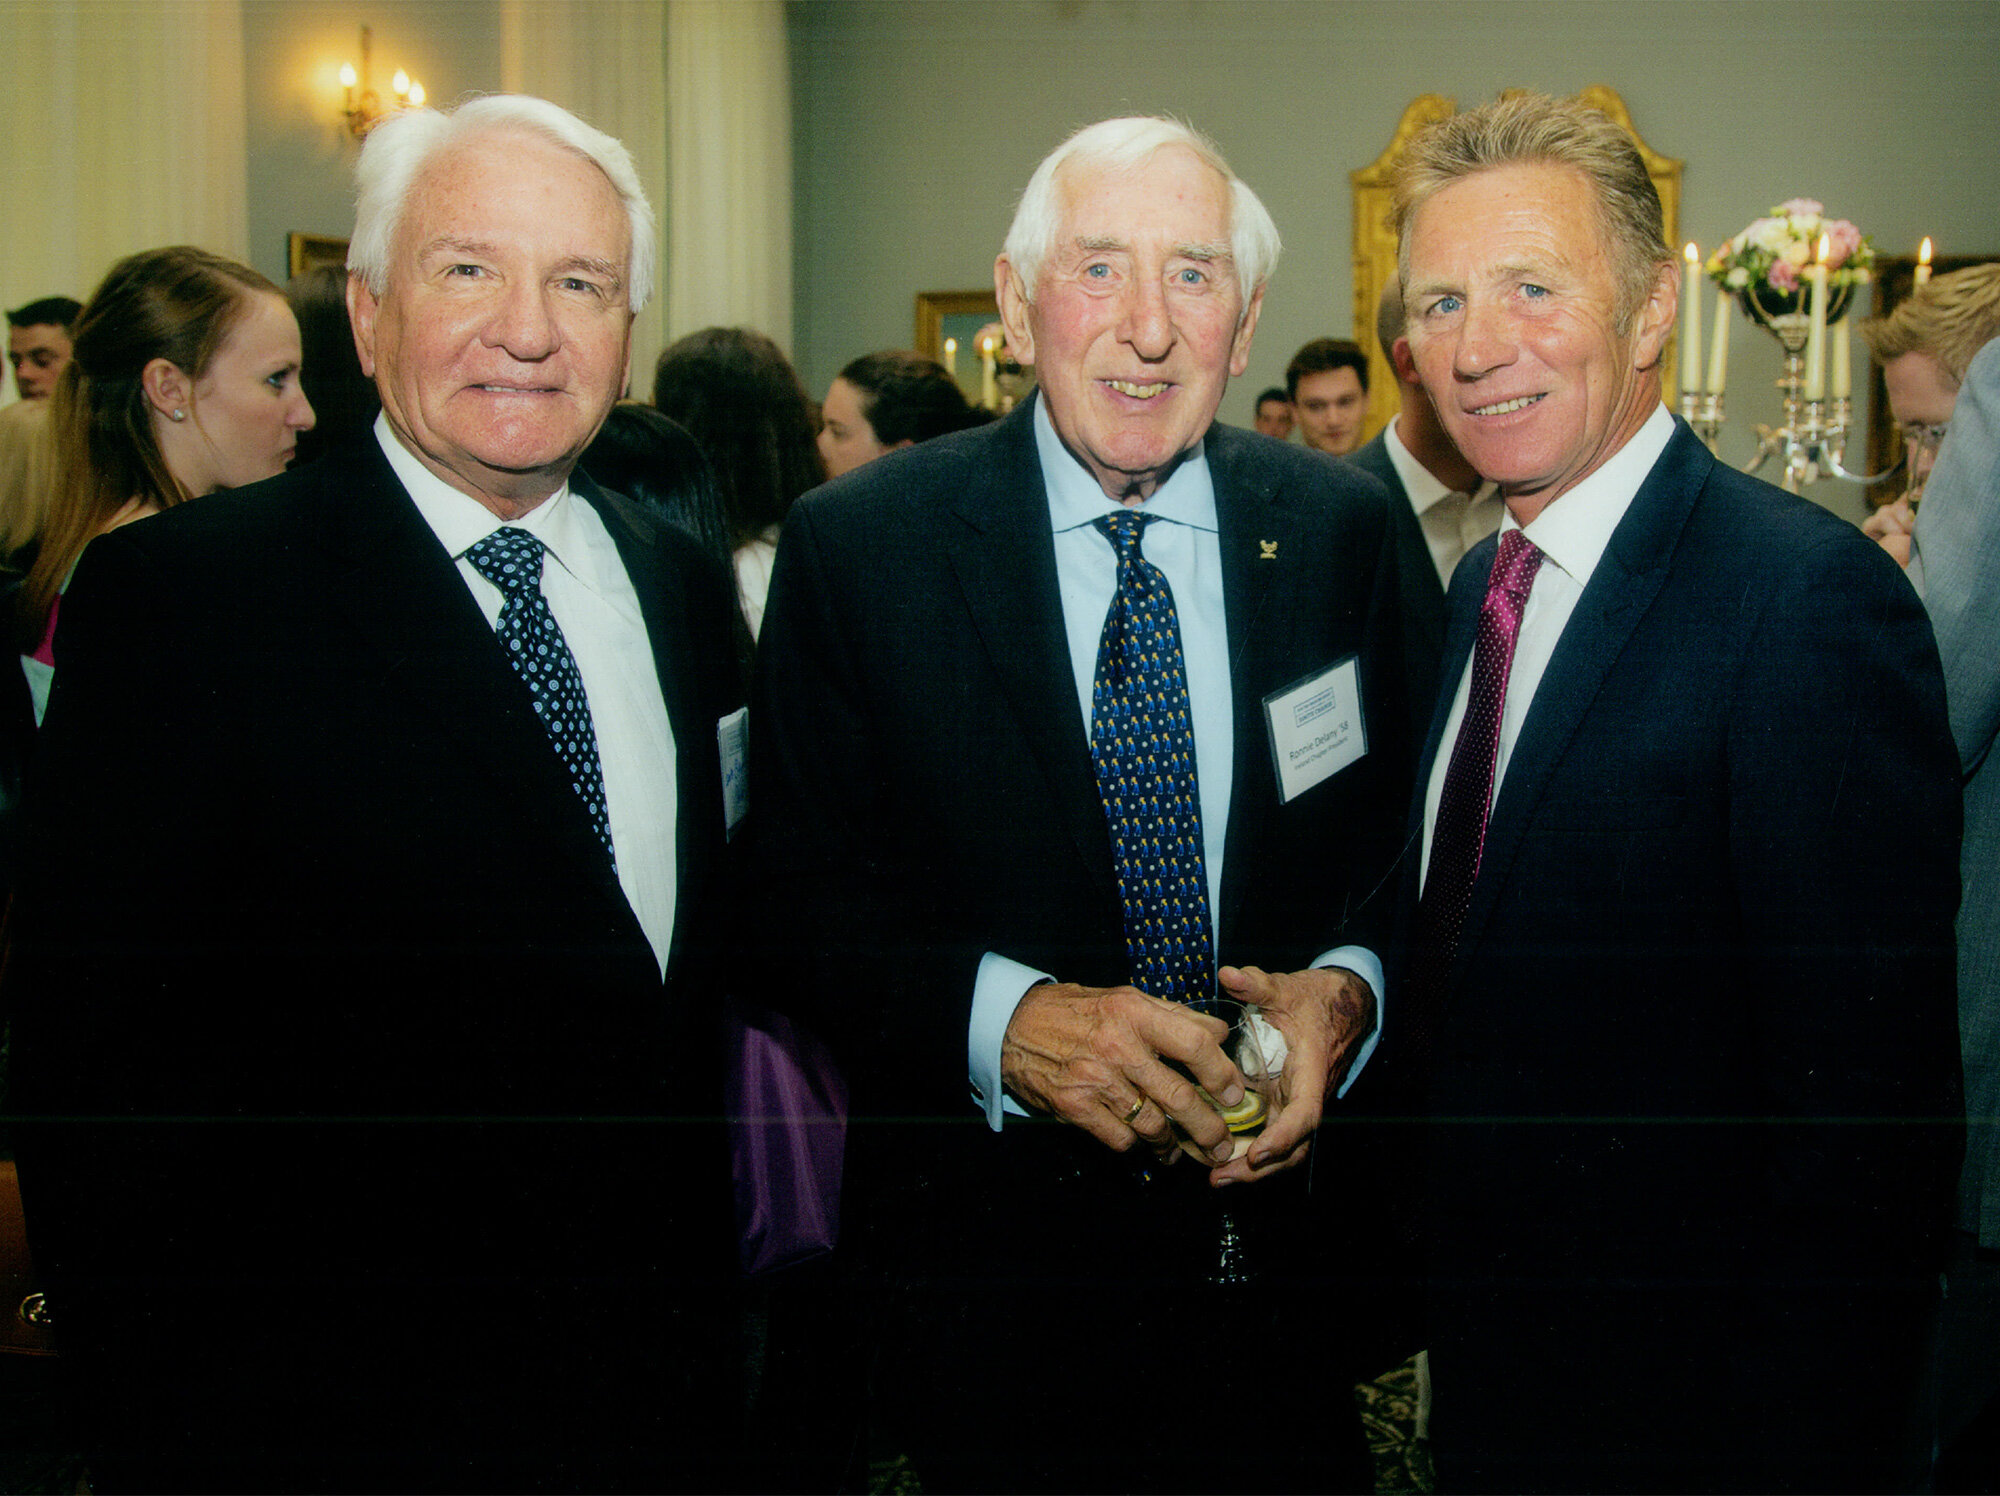  A picture of me with fellow&nbsp;Villanova grads&nbsp;Ron Delany (middle) and&nbsp;Senator Eamonn Colgan (right) during a&nbsp;Villanova event in Dublin,&nbsp;Ireland.&nbsp;Ron was an Olympic gold medal winner in the 1500 meters and Eamonn was an ol